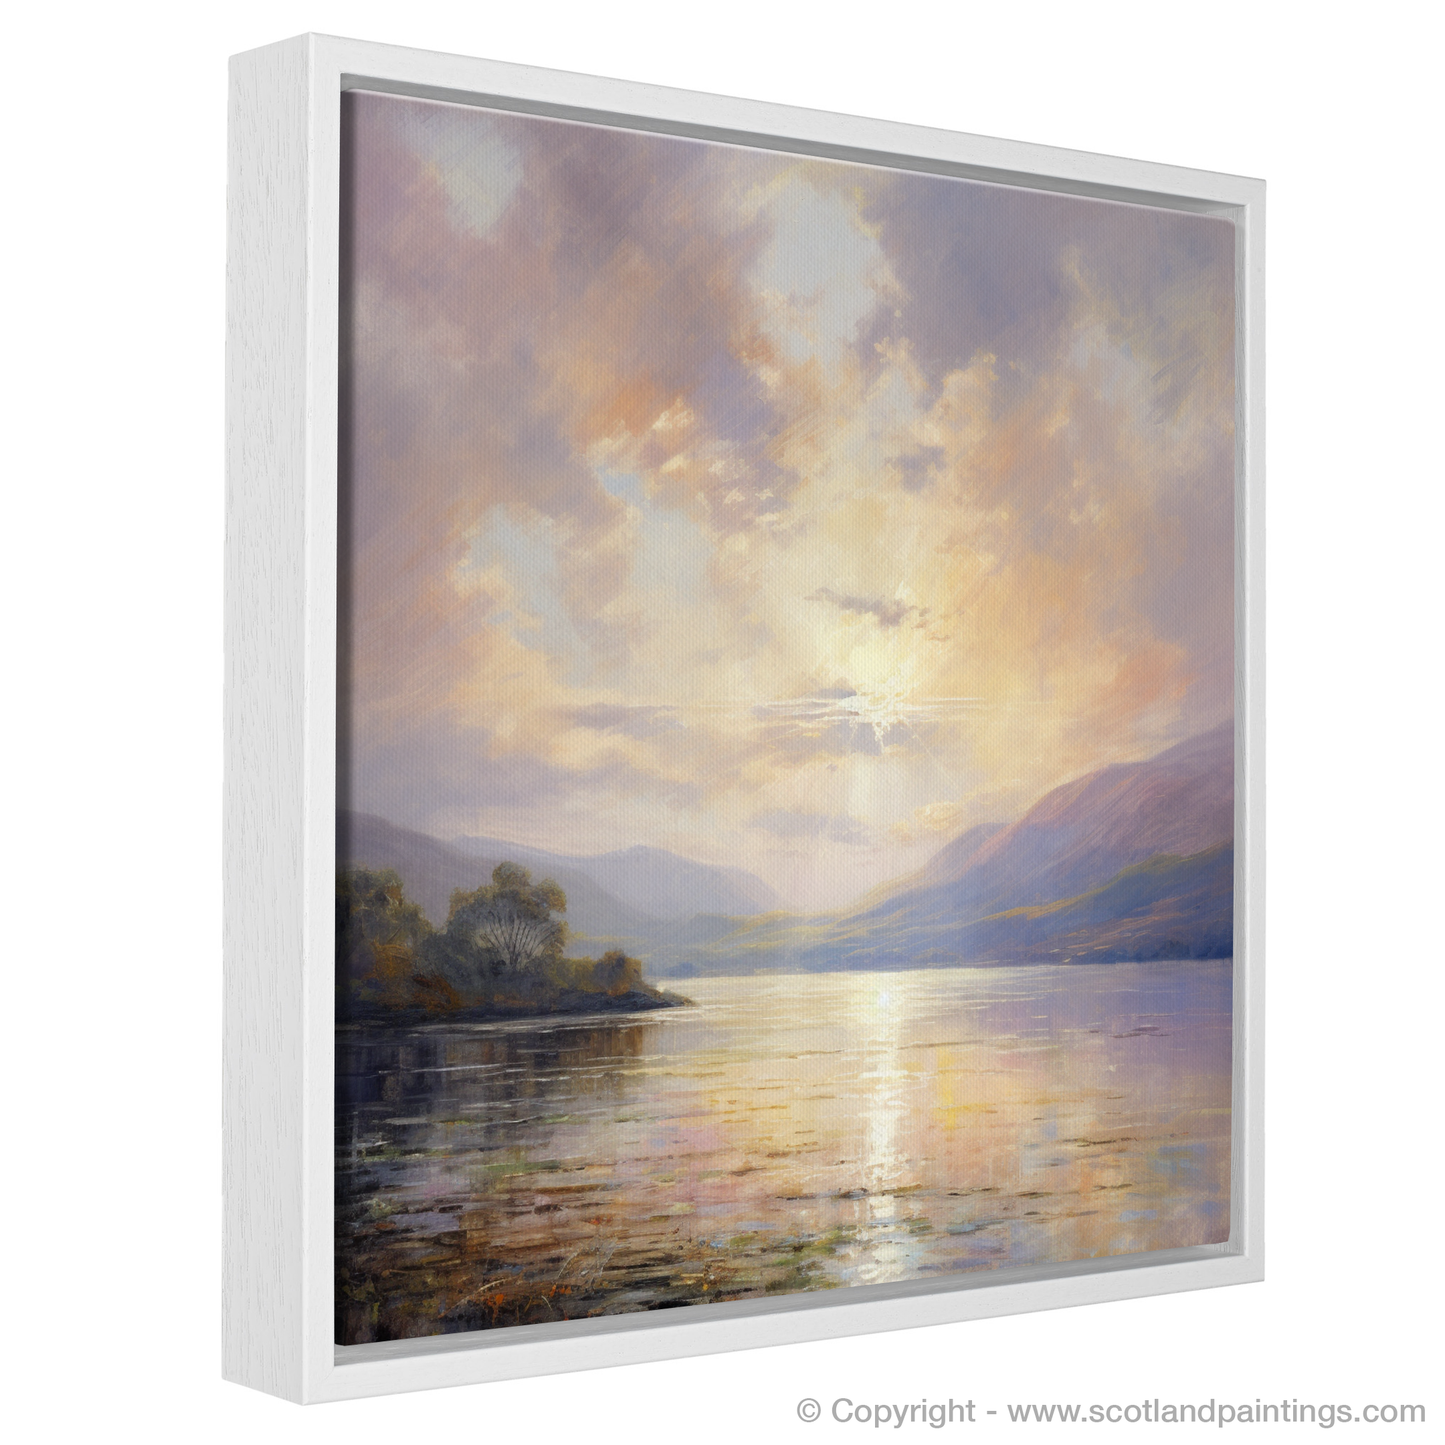 Painting and Art Print of Crepuscular rays above Loch Lomond entitled "Crepuscular Majesty over Loch Lomond".